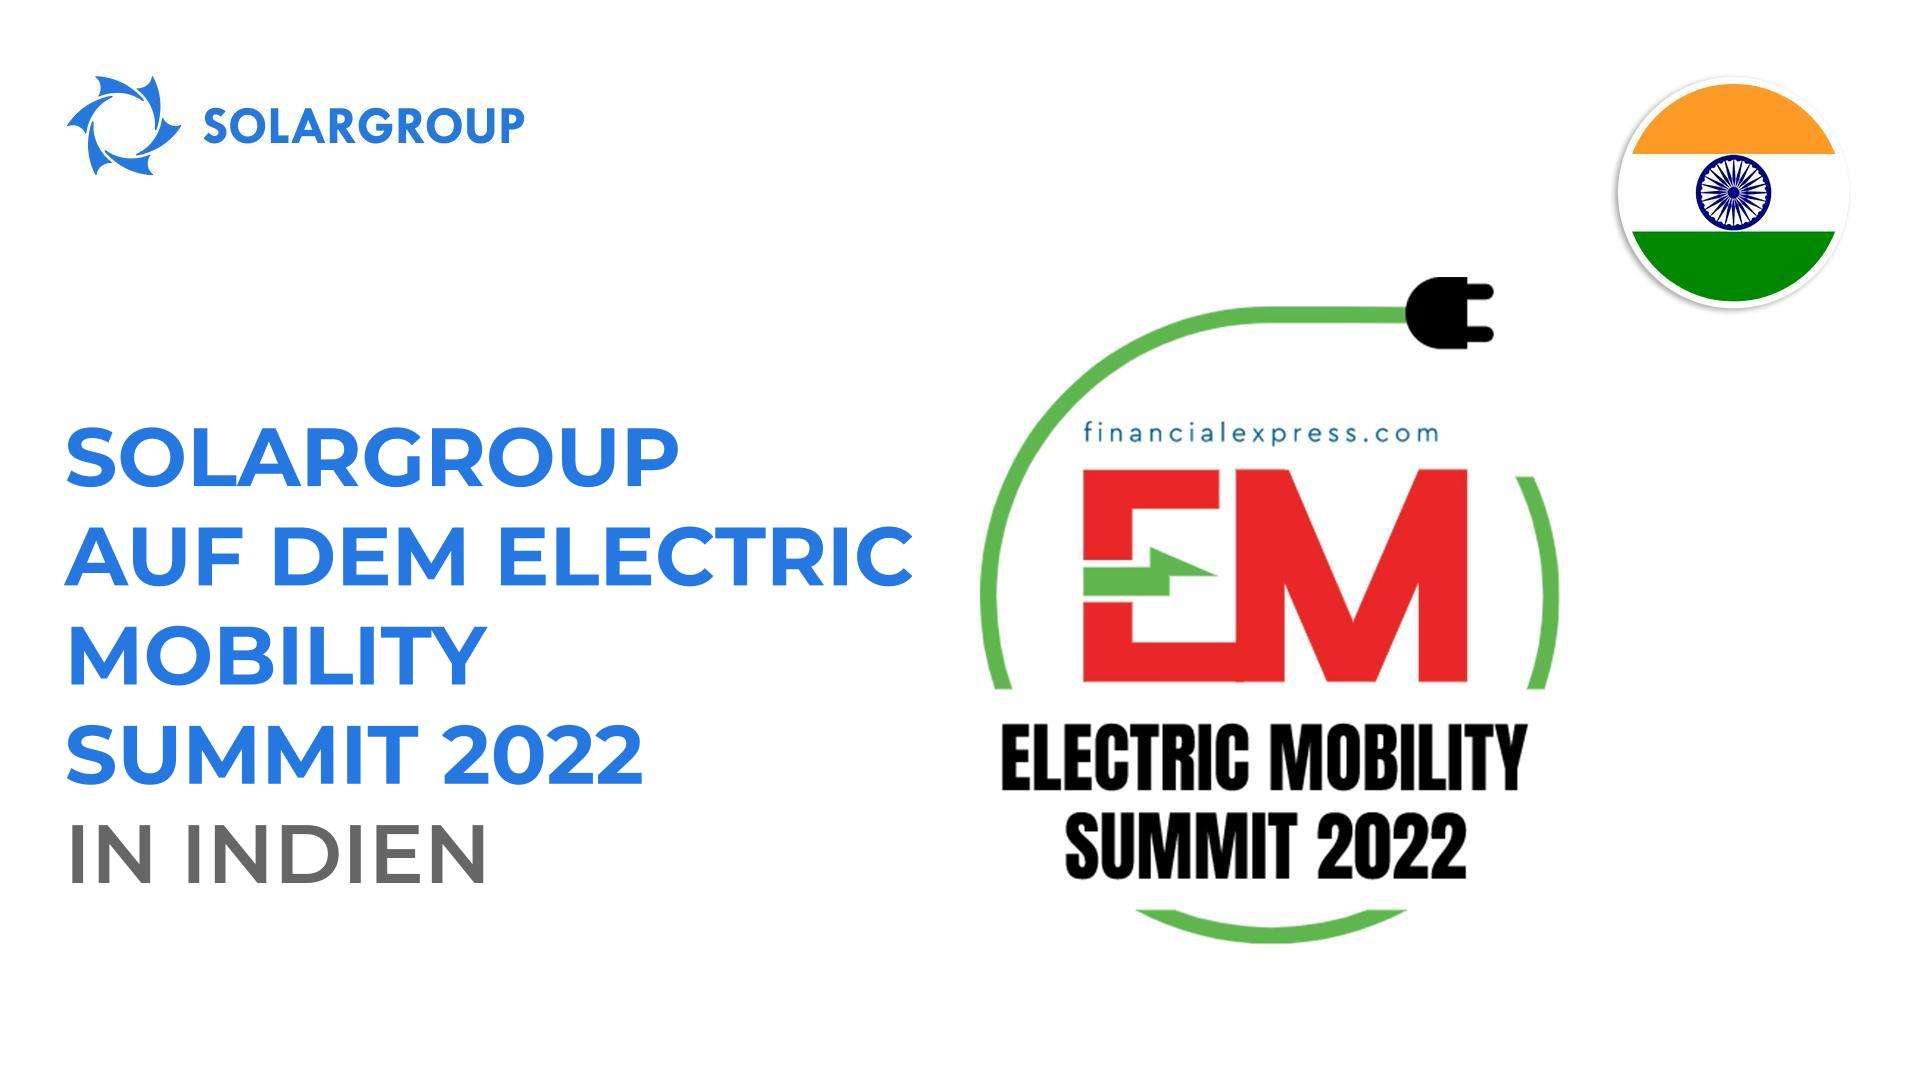 SOLARGROUP auf dem Electric Mobility Summit 2022 in Indien